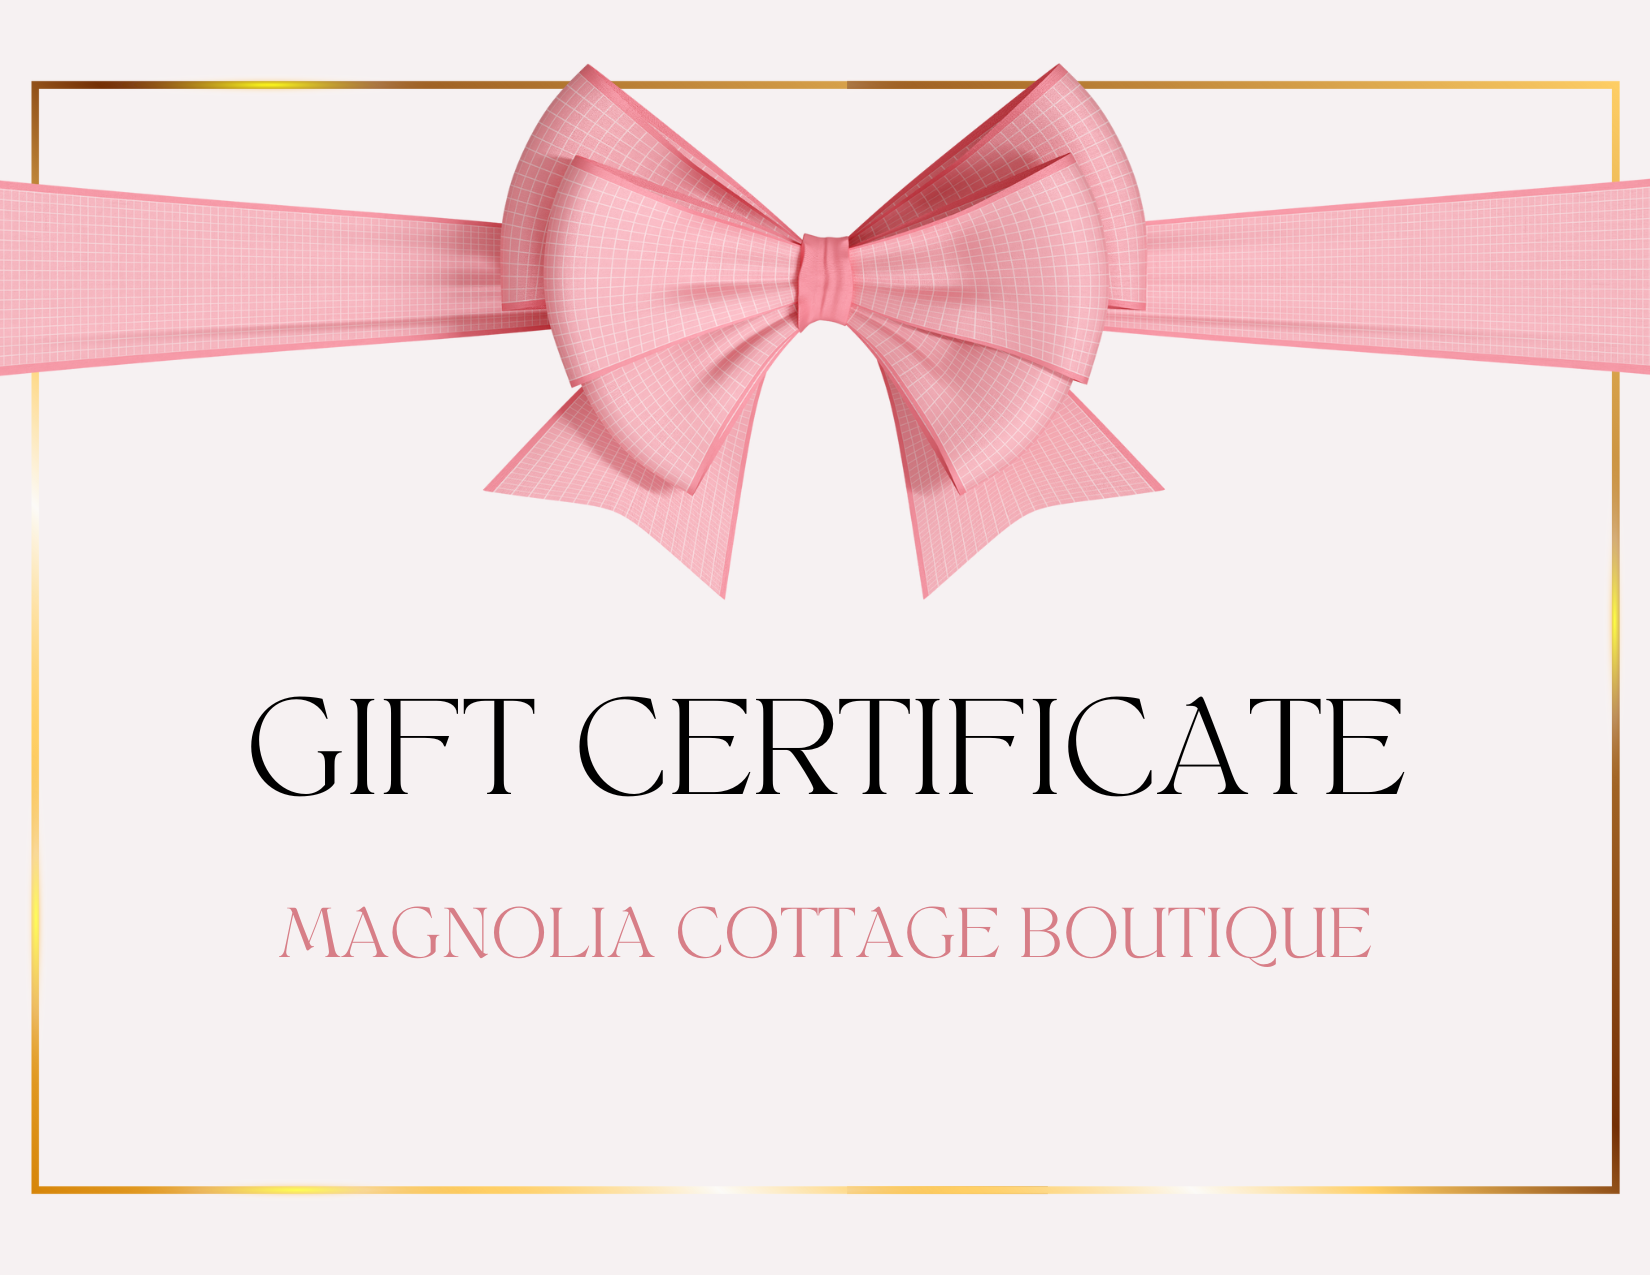 Magnolia Cottage Boutique Gift Card The Magnolia Cottage Boutique